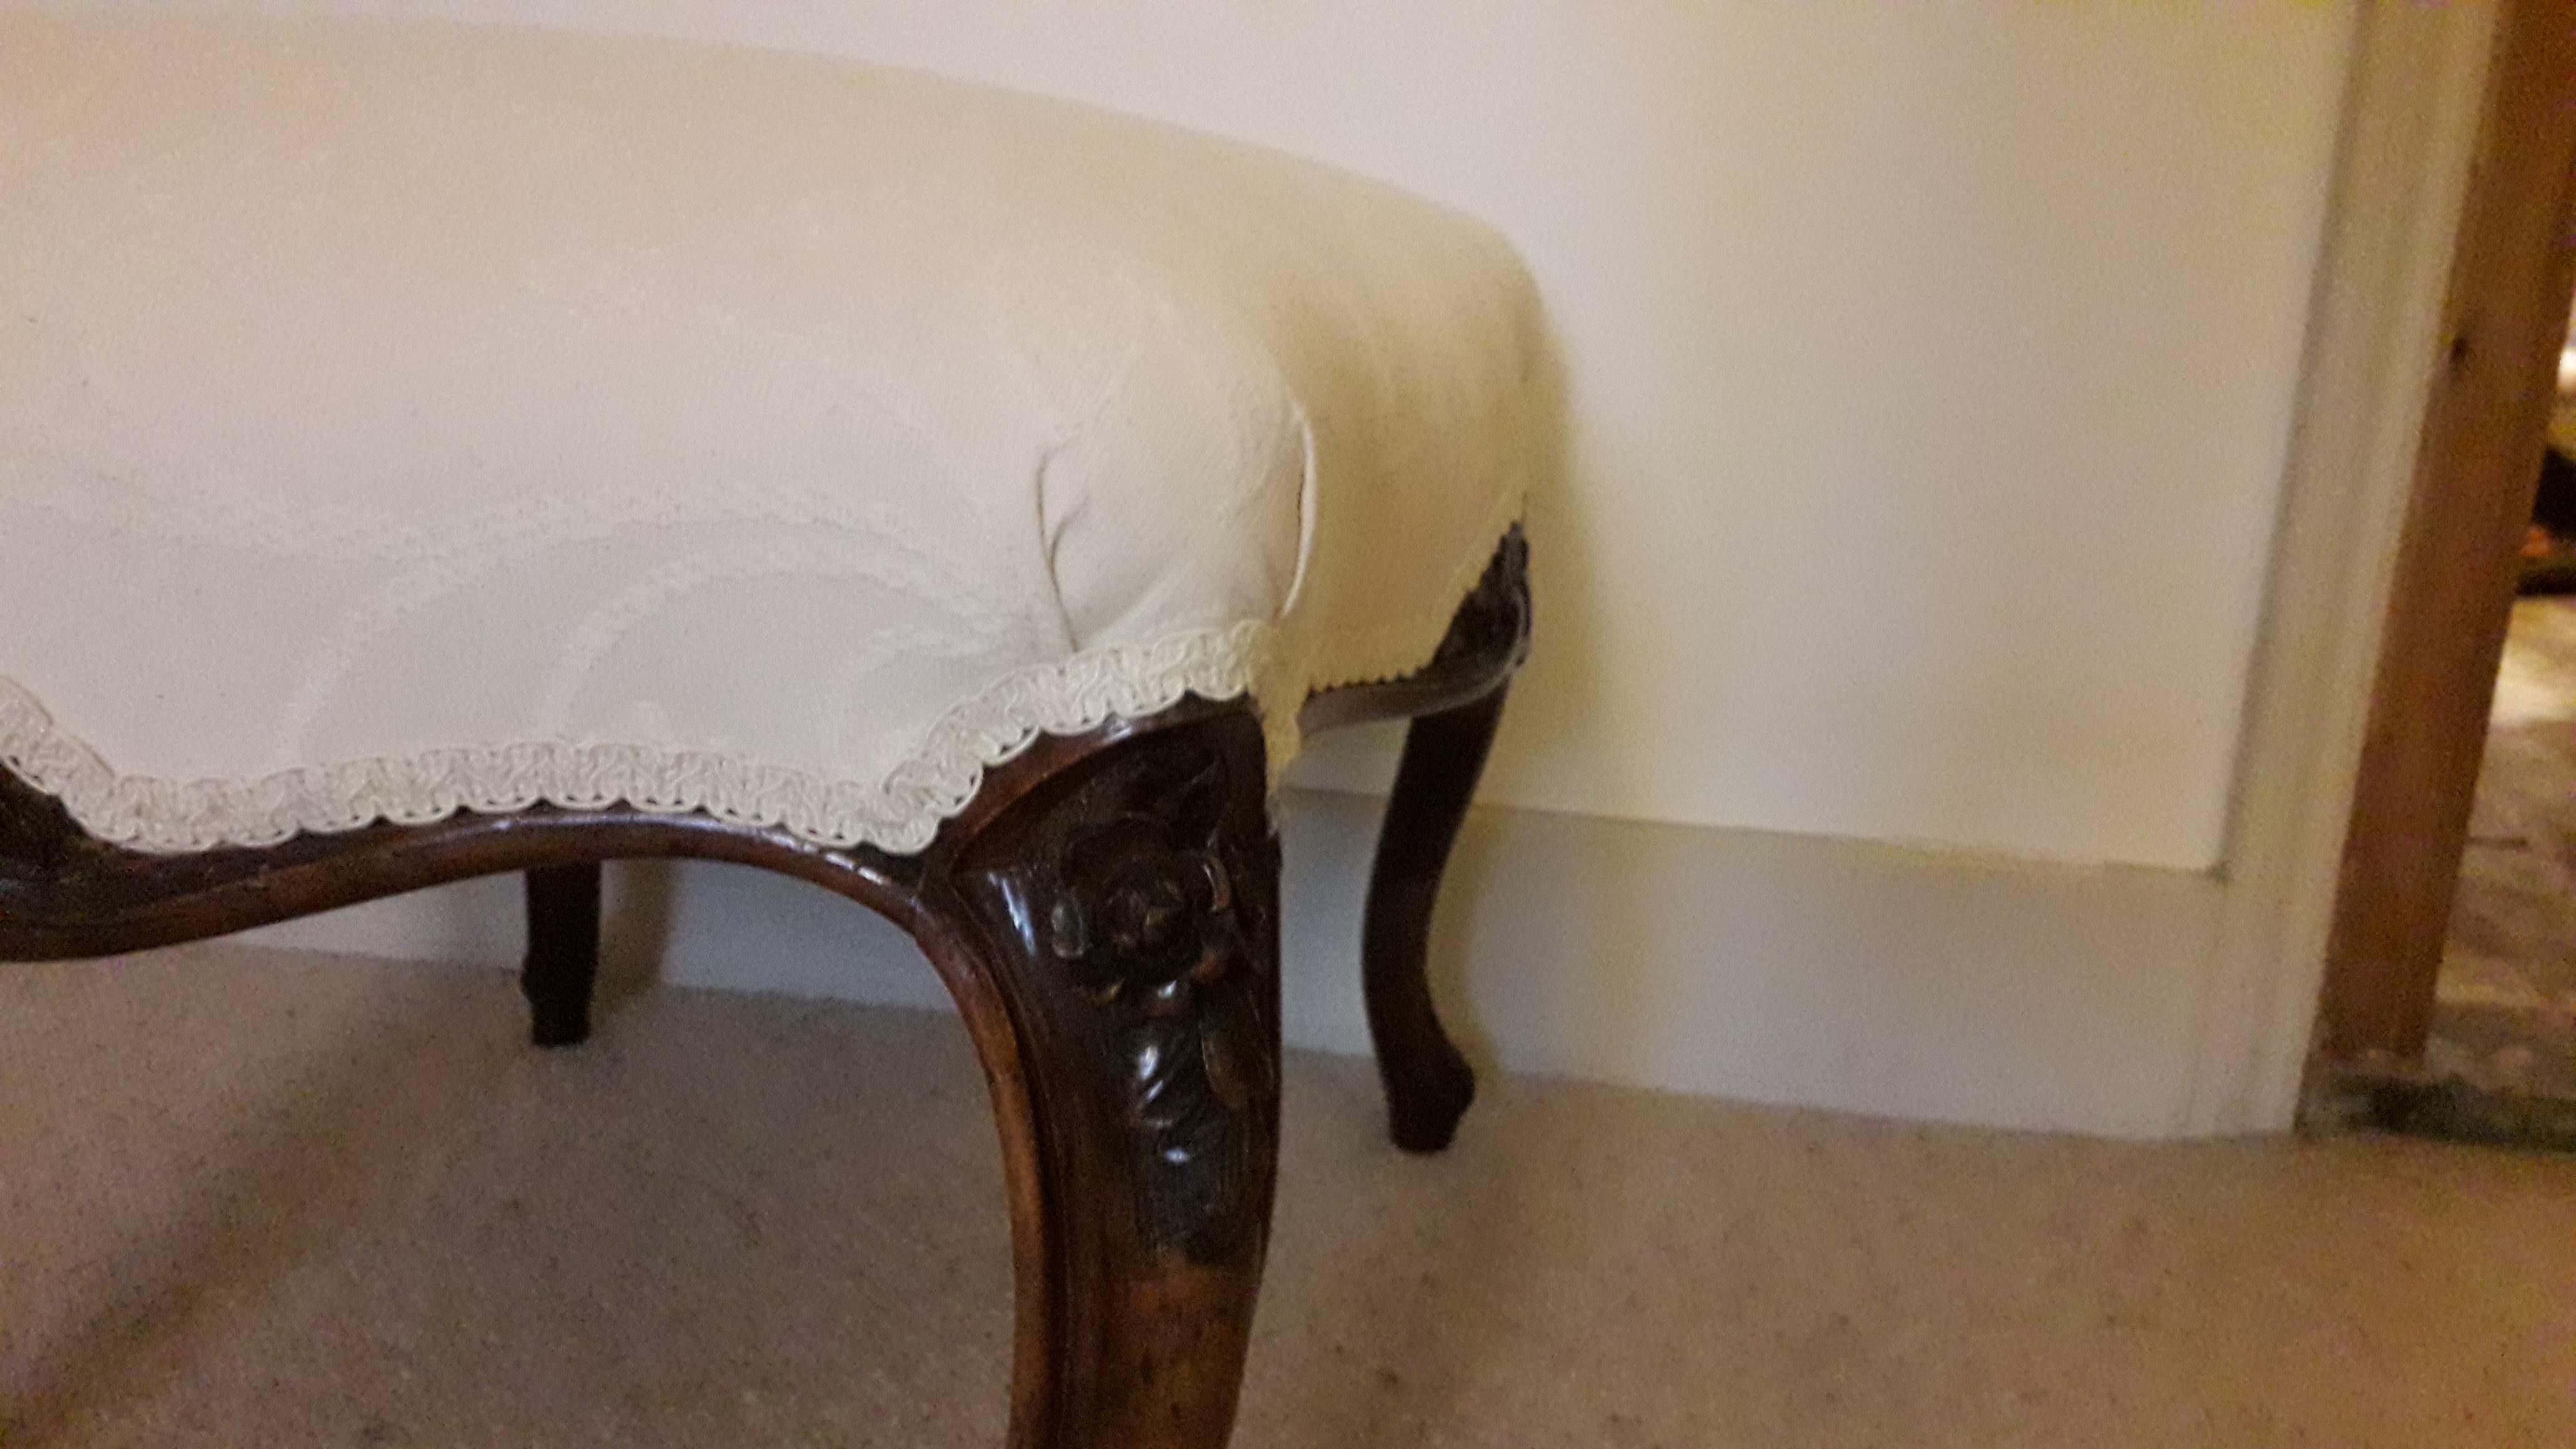 An excellent quality period walnut dressing stool with beautiful carved and serpentine shaped sides,
the cabriole legs with floral carved profiles, the piece has been recently upholstered in this substantial white patterned fabric.
Please allow for